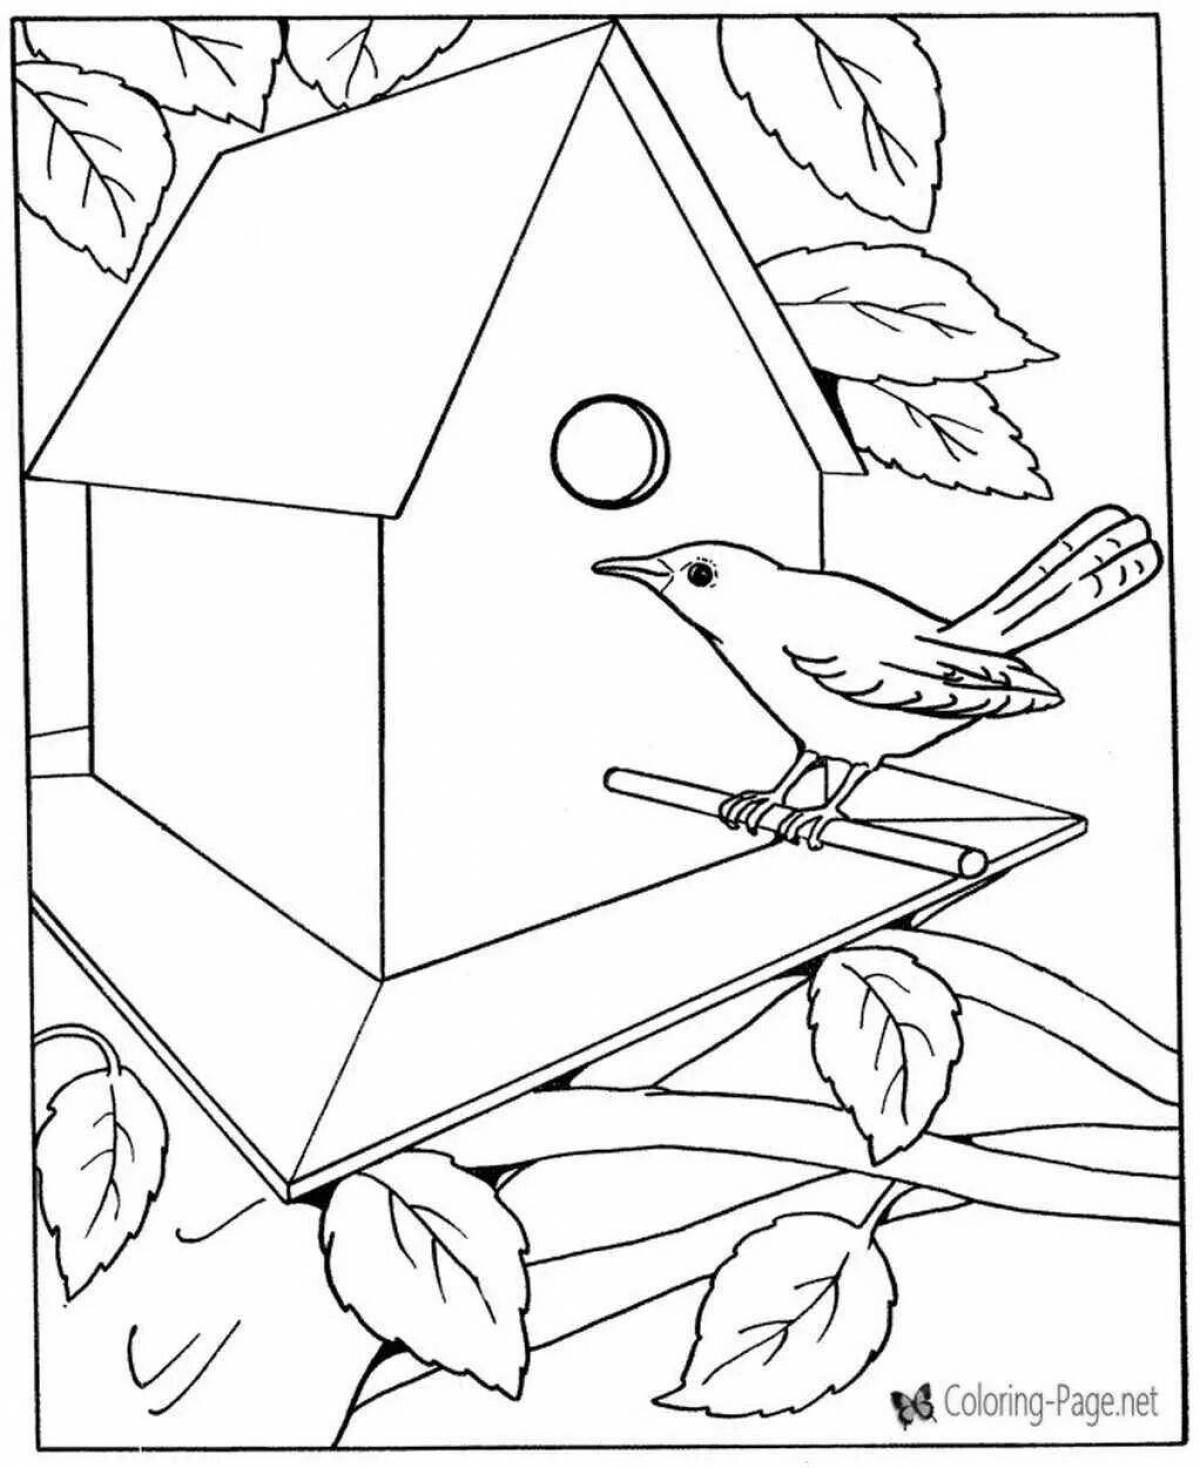 Colorful birdhouse coloring pages for kids